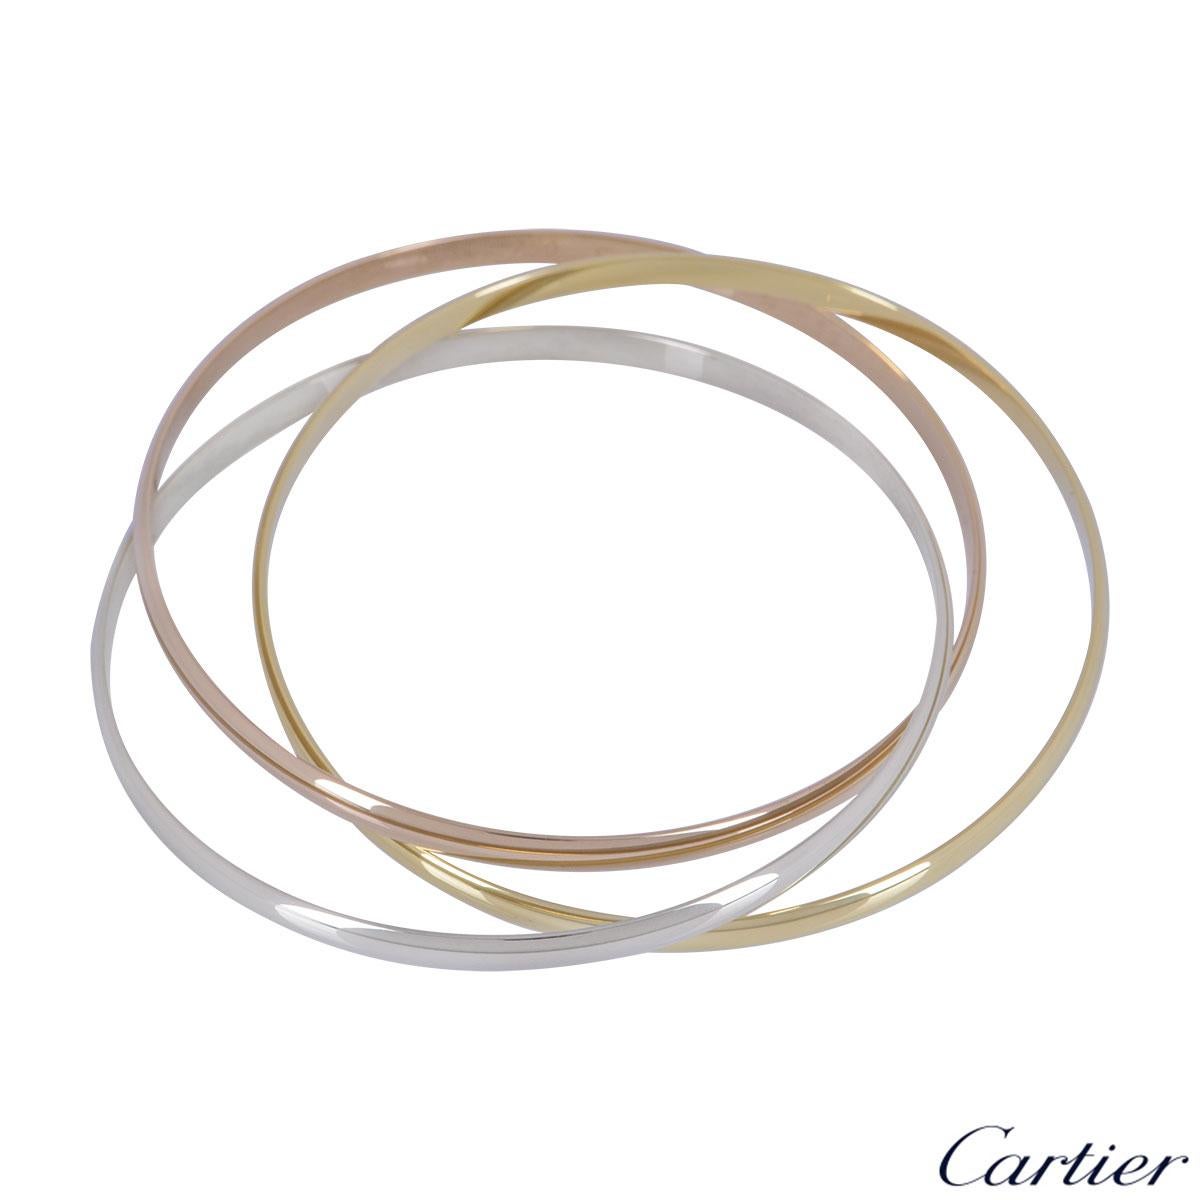 An iconic 18k tri-colour gold bangle by Cartier from the Trinity De Cartier collection. The bracelet is made up of three intertwined 18k rose, white and yellow gold 4mm bands. The bracelet is a 18cm and has a gross weight of 14.53 grams. 

The